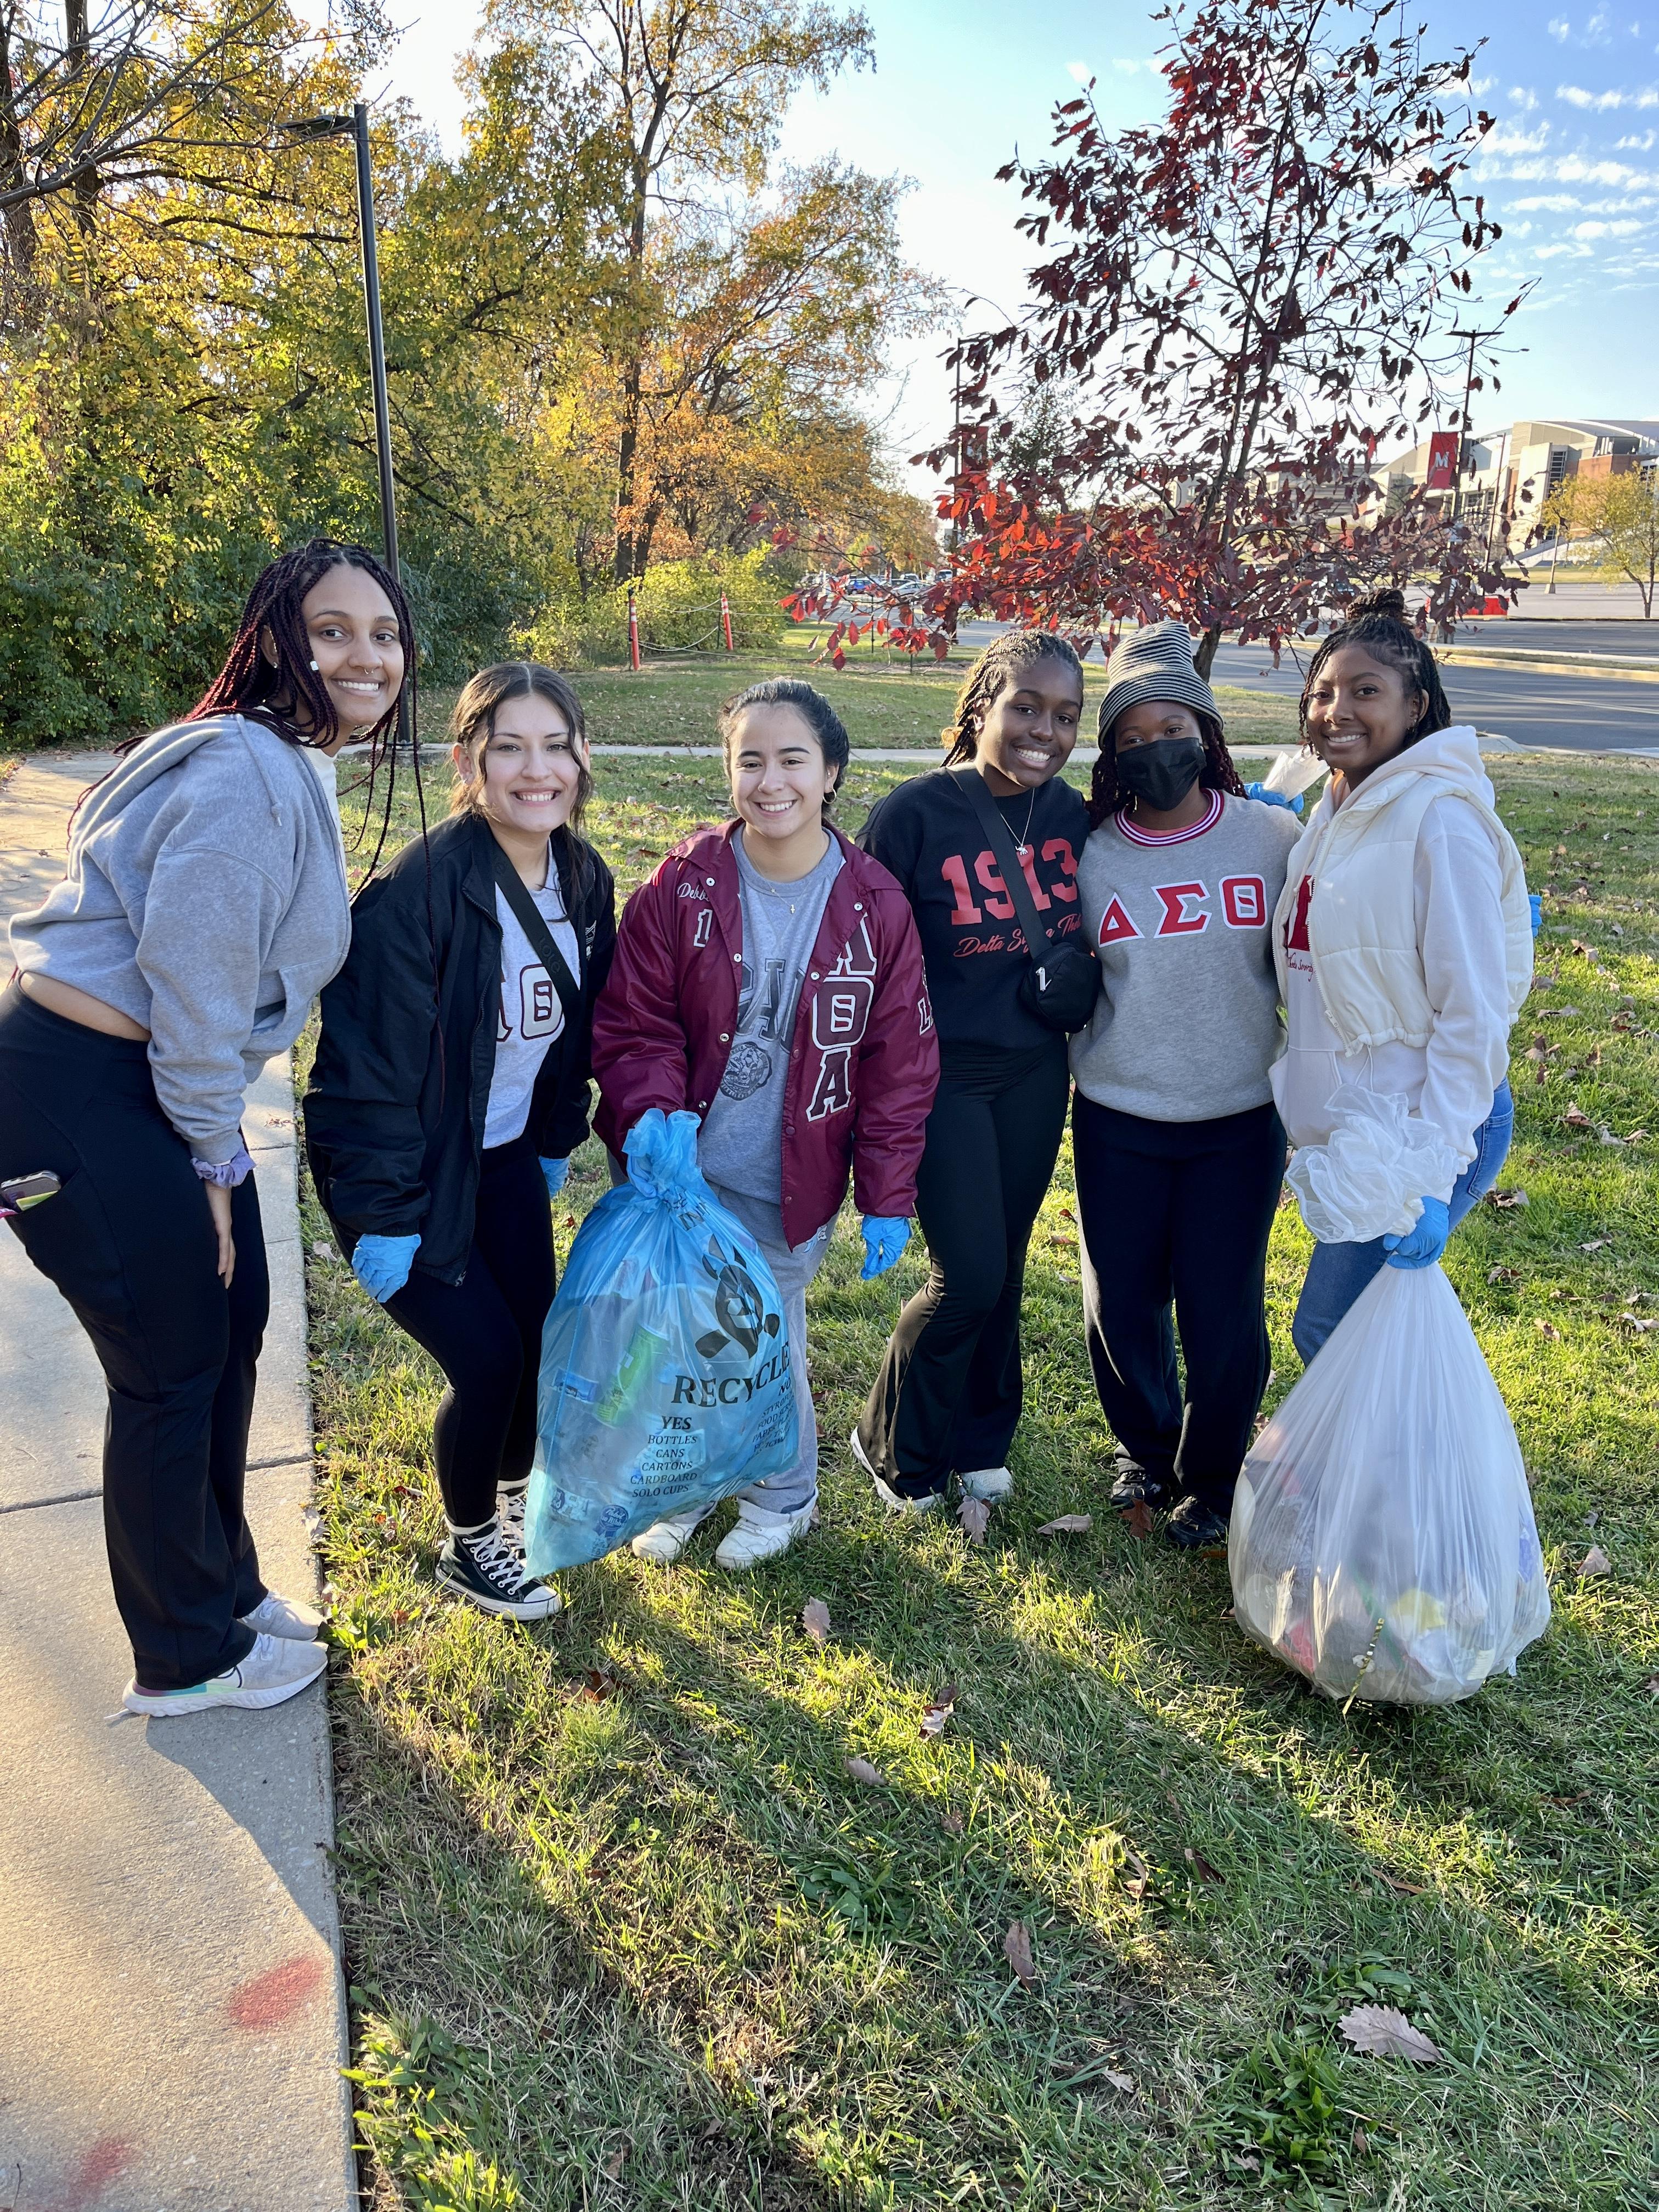 Students wearing Greek letters hold bags of collected litter.